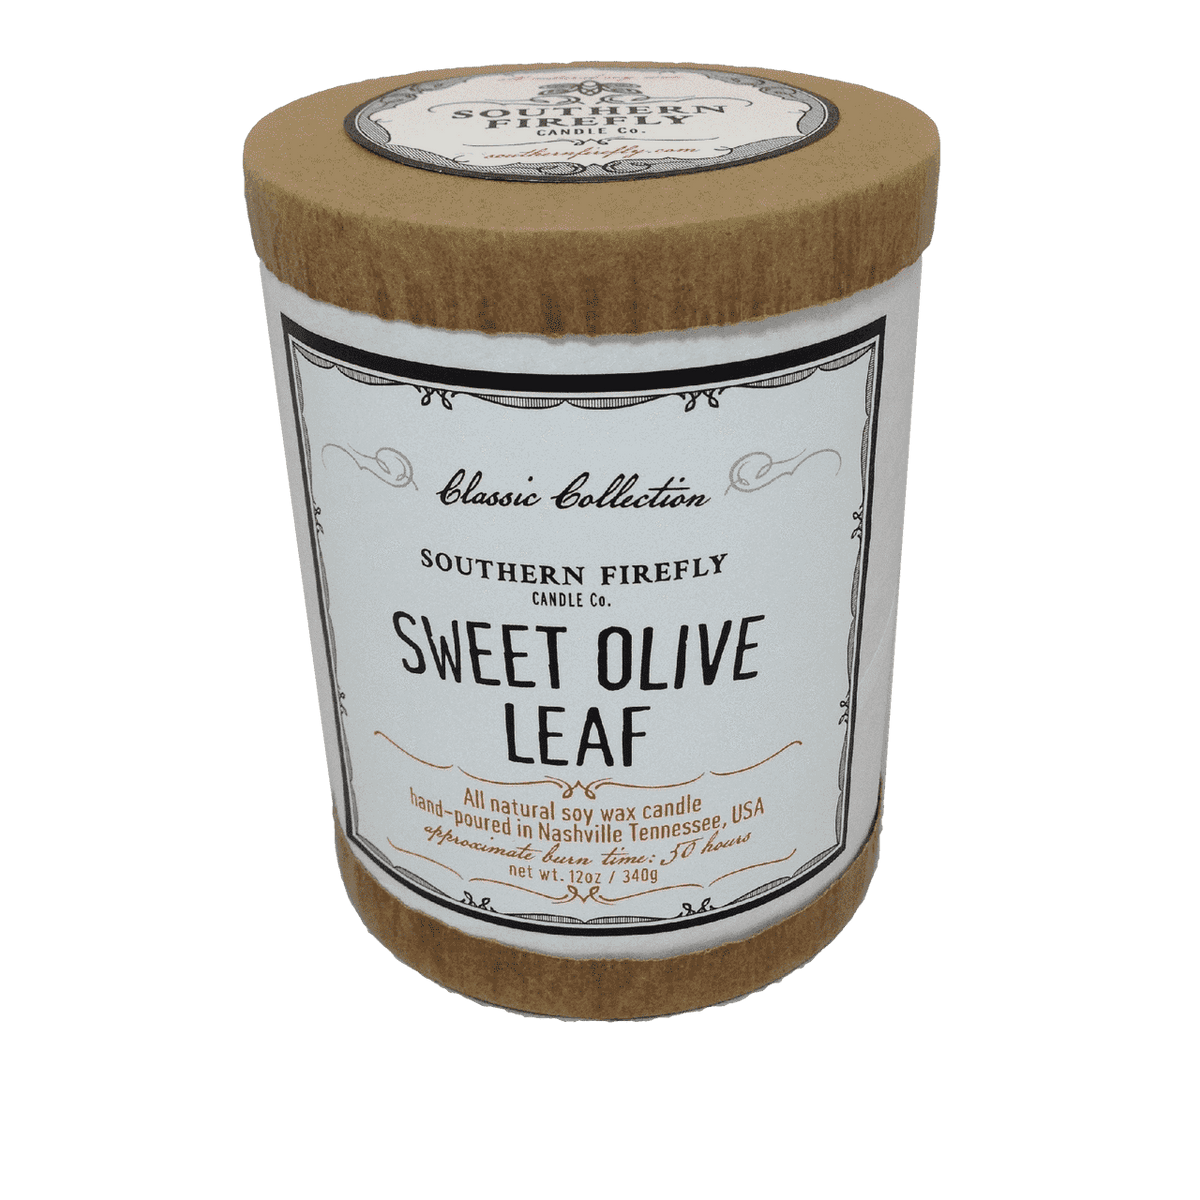 Classic Collection Soy Candle in Sweet Olive Leaf Scent by Southern Firefly Candle Co. - Country Club Prep